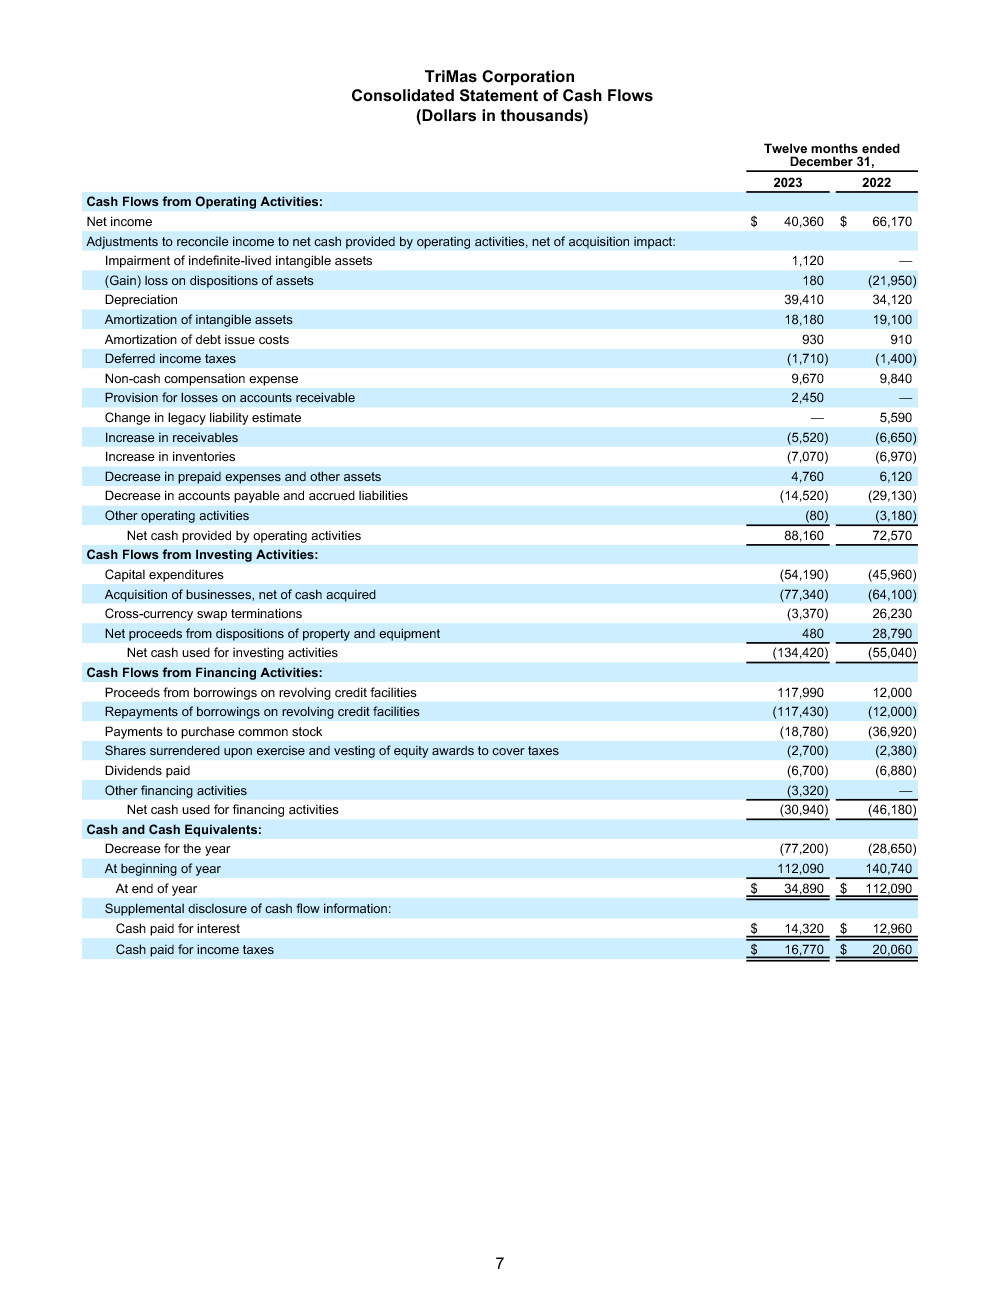 FINAL 22924 Q4 and Full Year 2023 Earnings Release 7